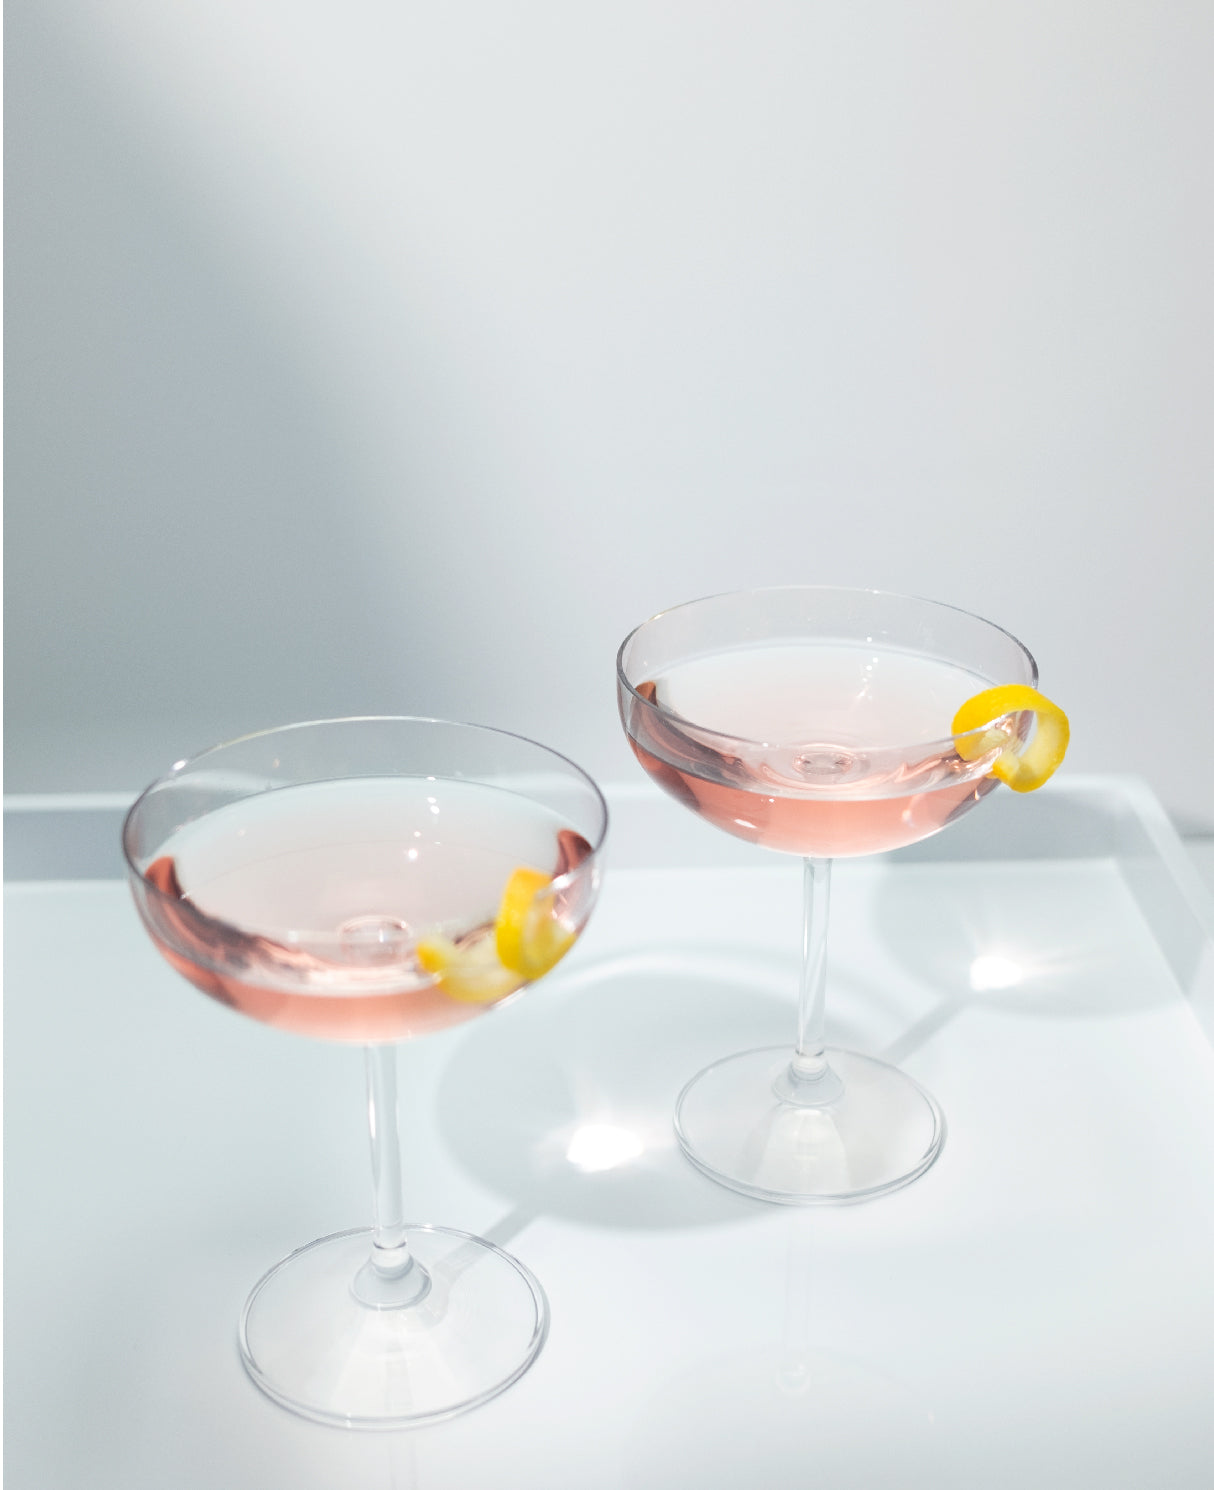 Two Cosmopolitan cocktails in coupe glasses, garnished with a lemon twist.